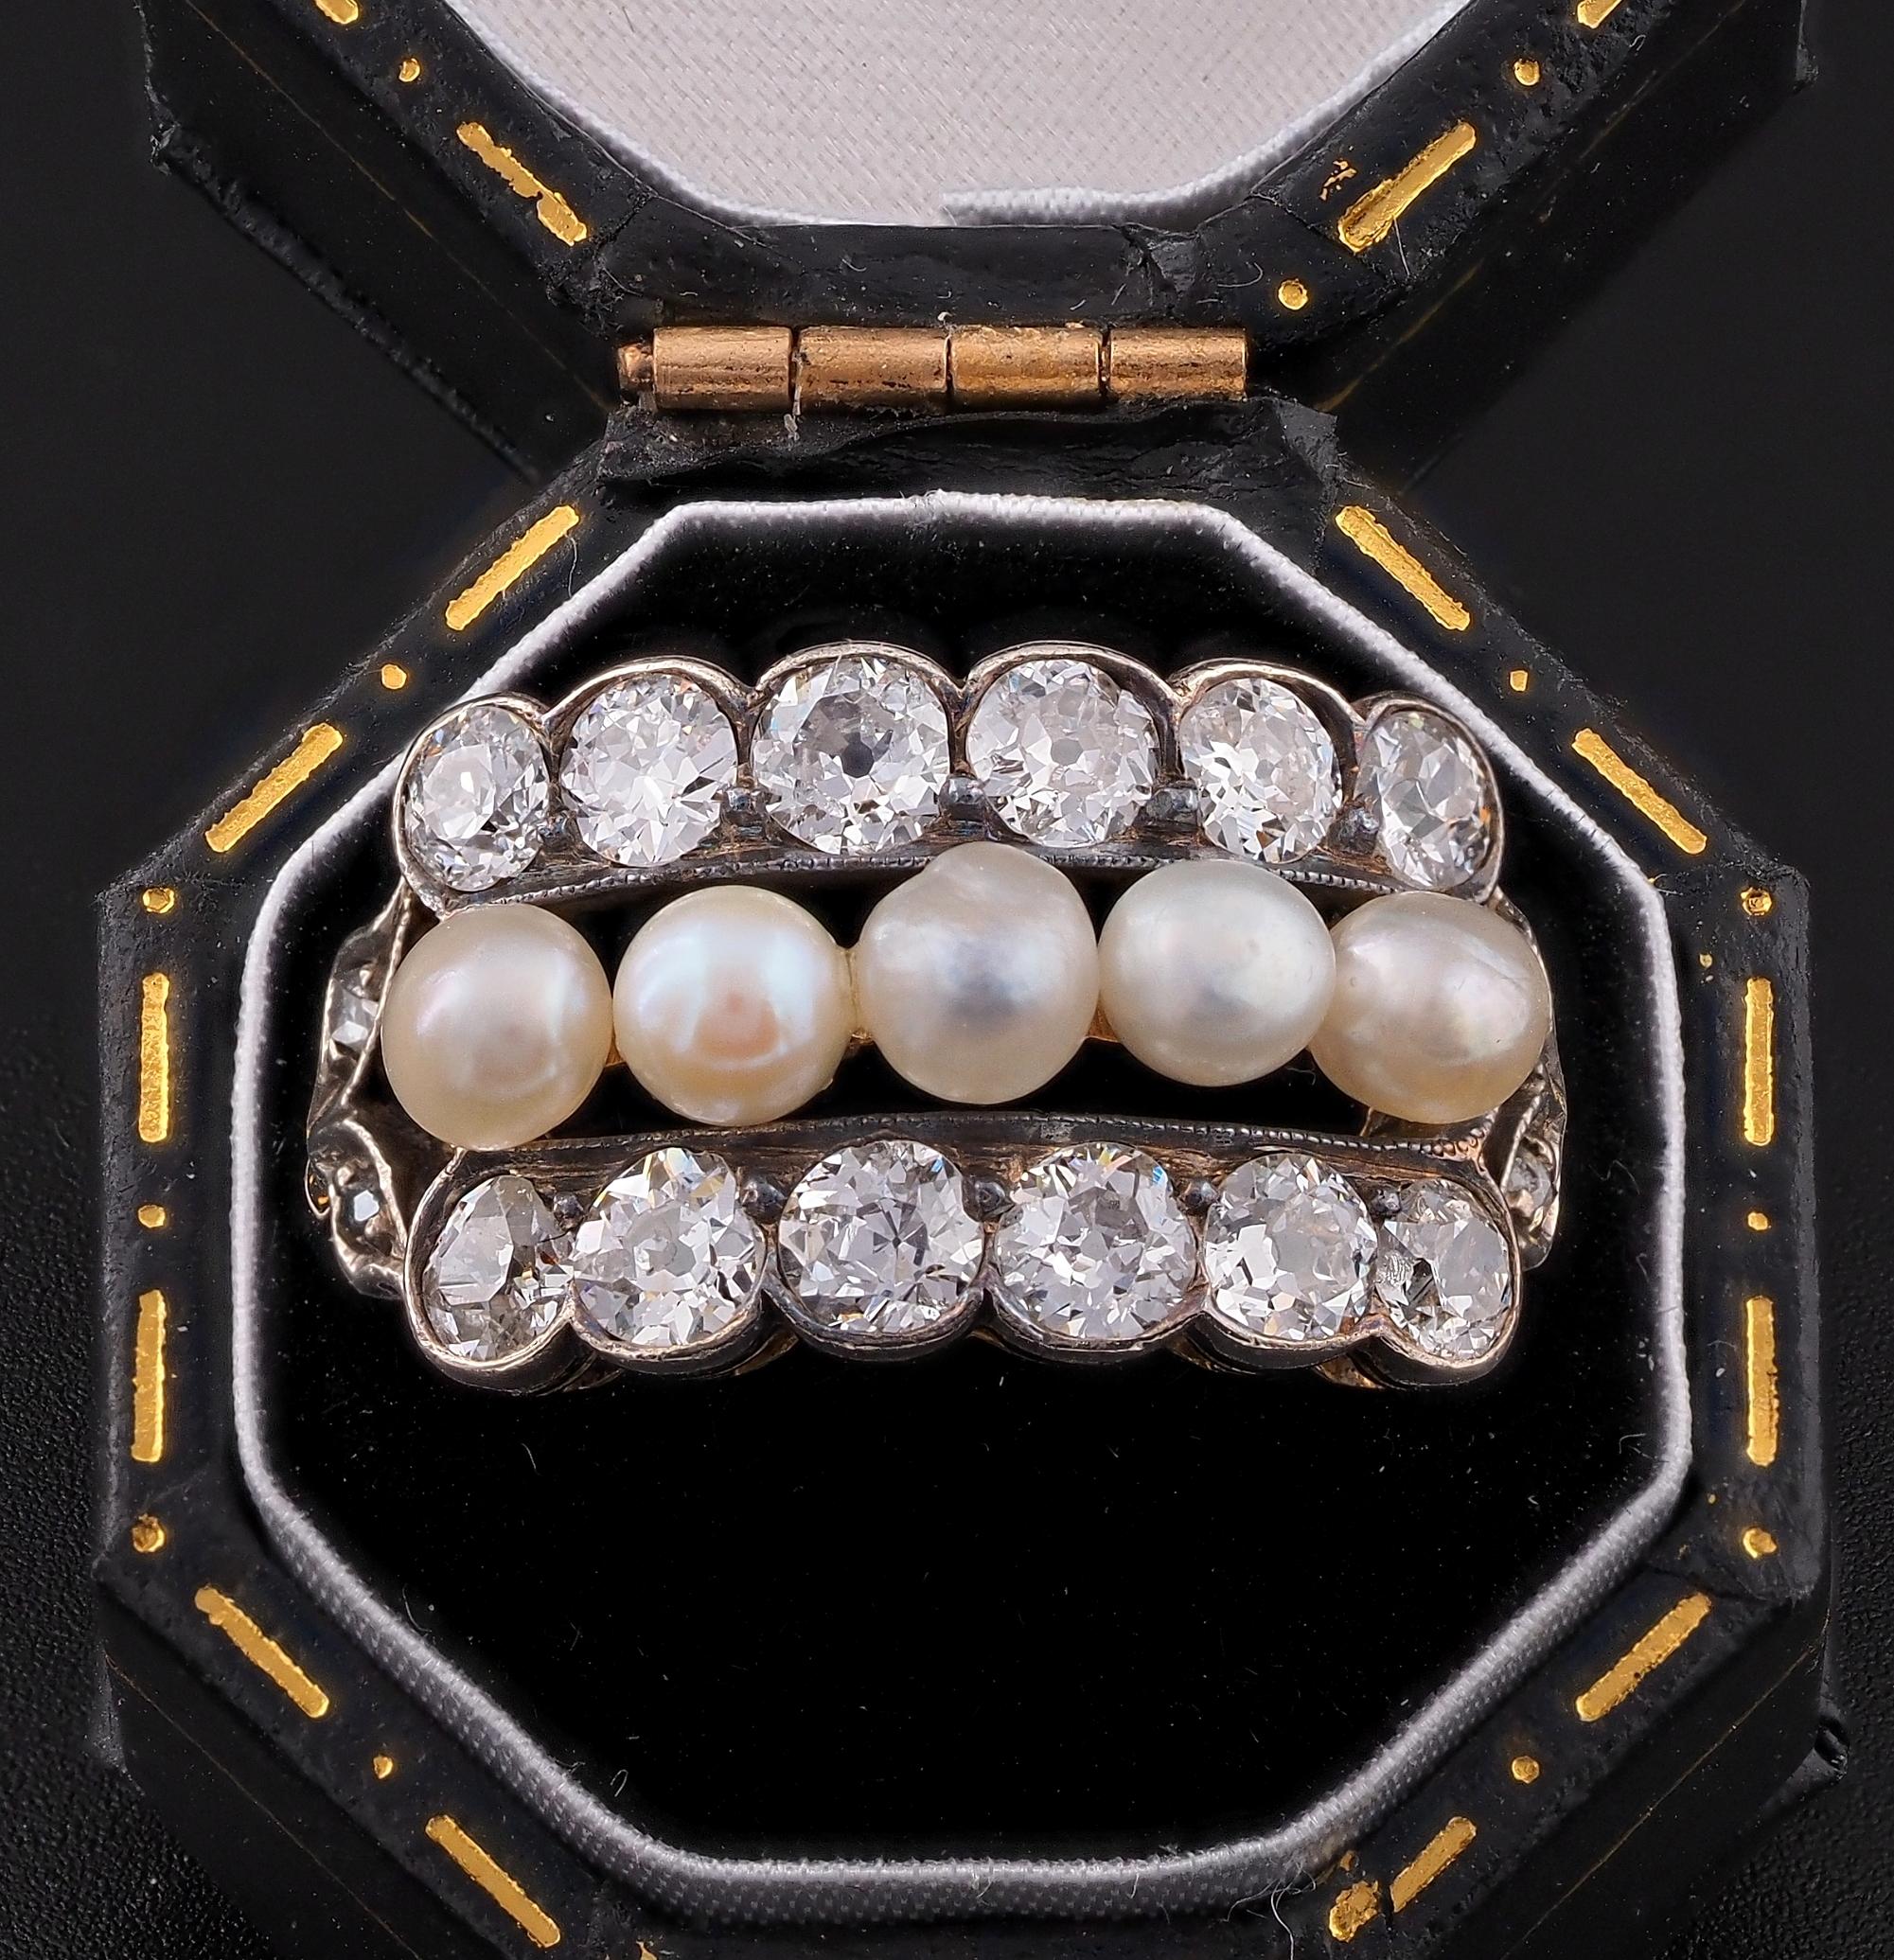 A distinctive Victorian Diamond Natural pearl ring, 1890/1900 ca
Hand crafted of solid 18 KT gold topped by Platinum
Understated design, comprising three rows of gemstones set between old mine cut Diamonds and Natural salt water, not